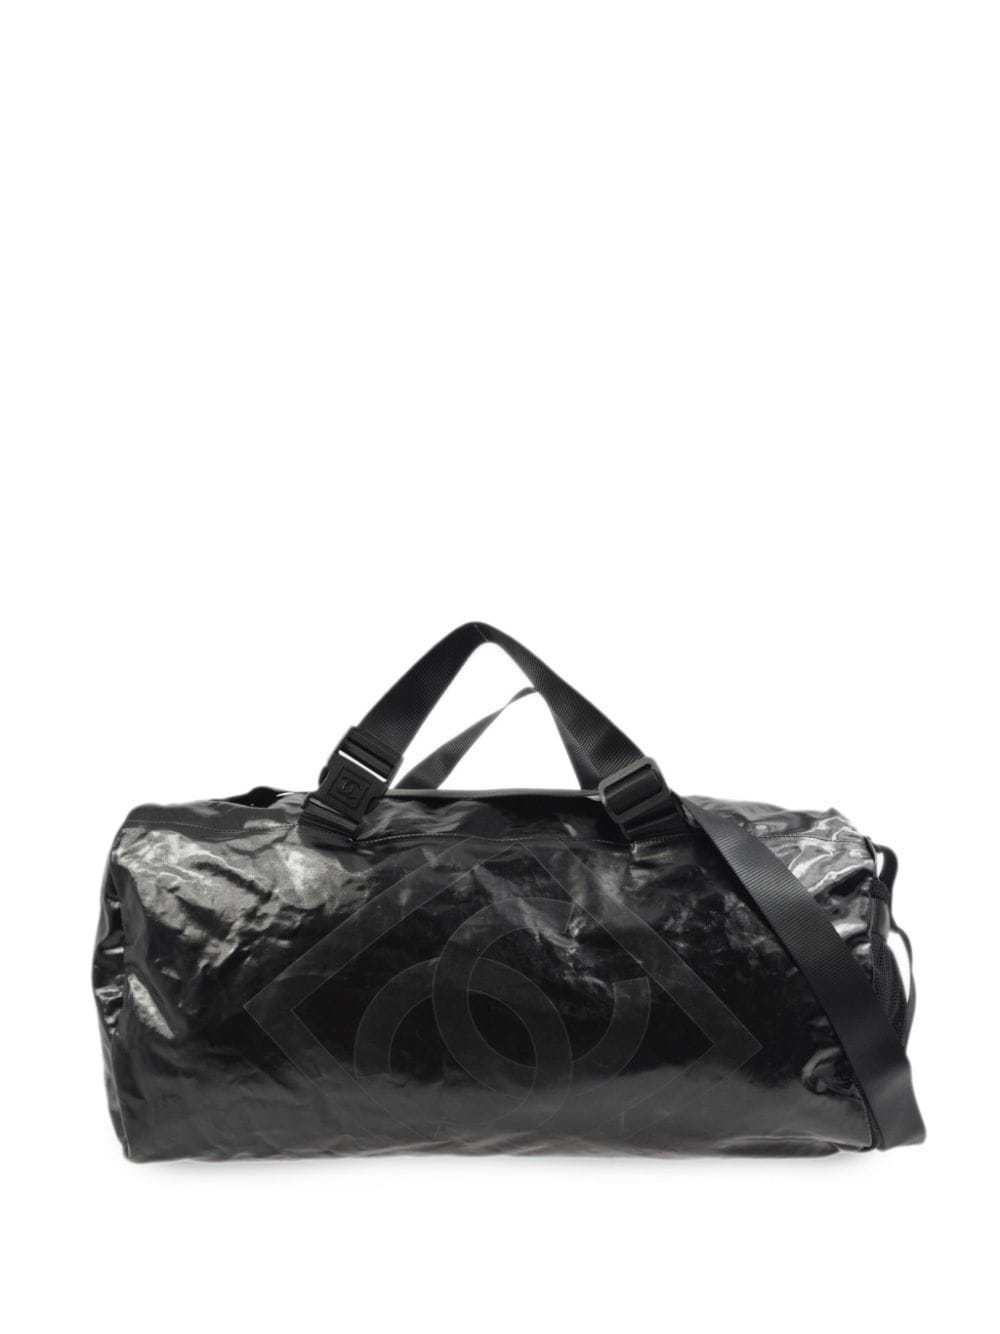 CHANEL Pre-Owned 2007 Sport Line duffle bag - Bla… - image 1